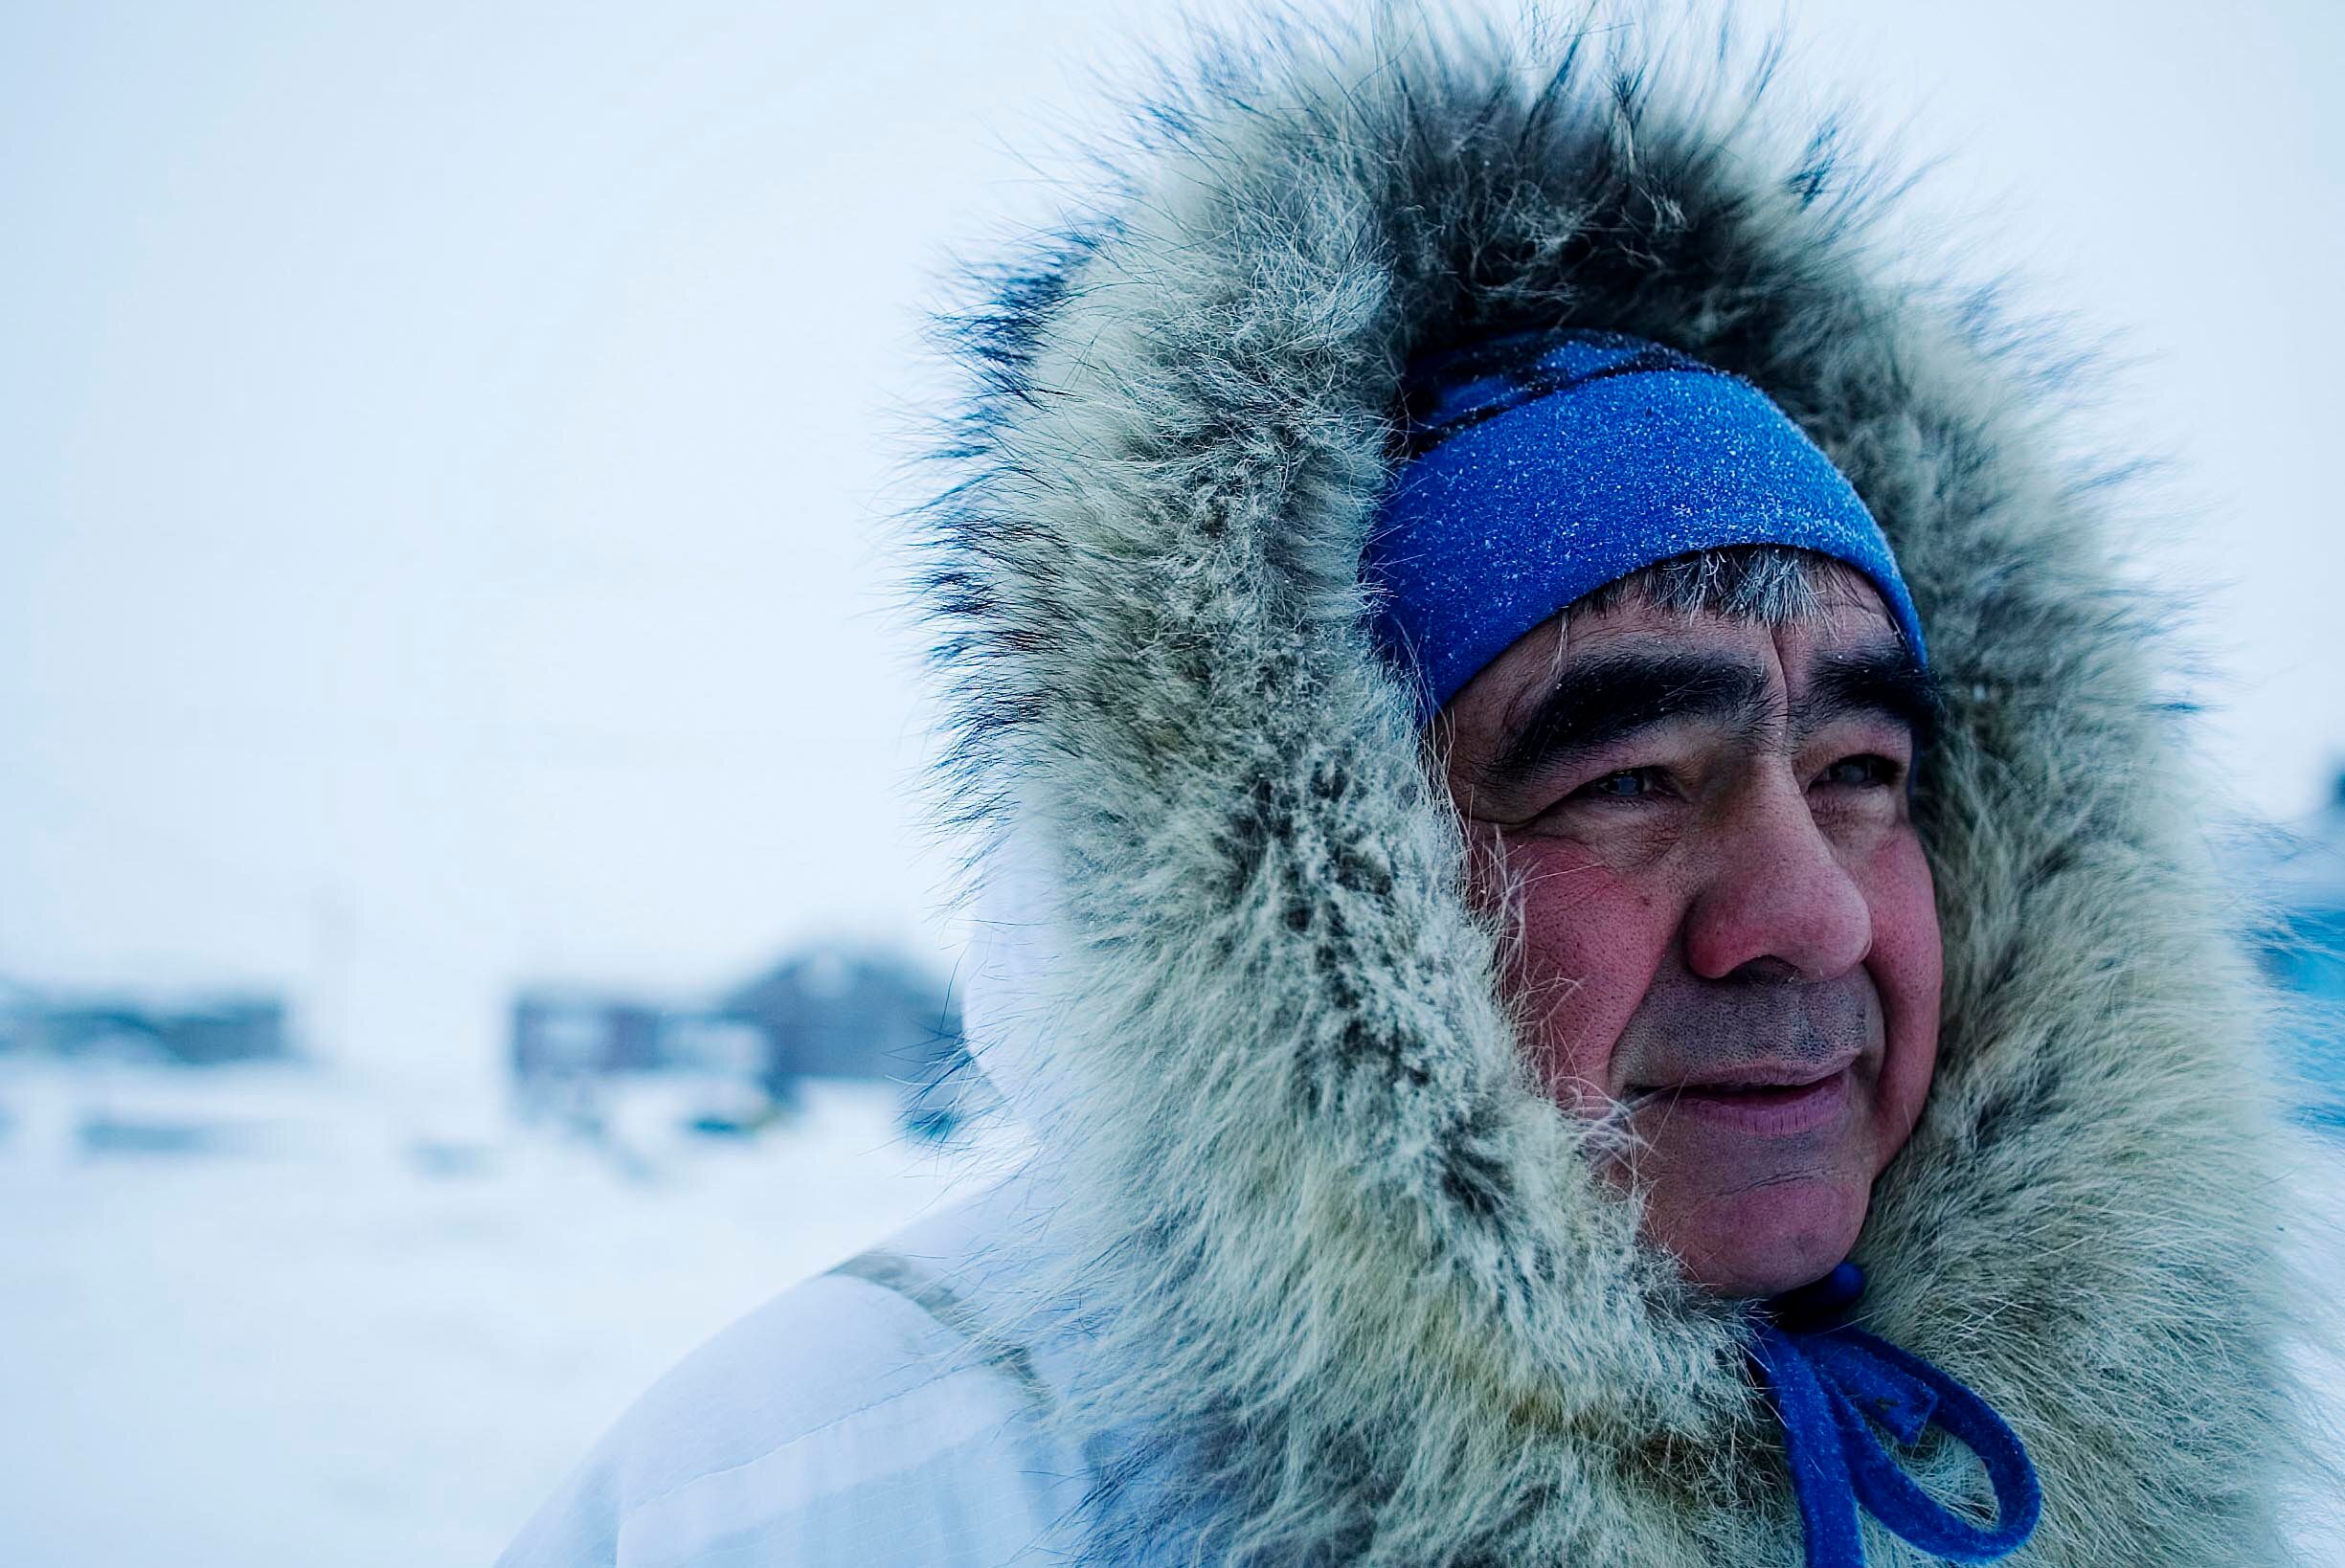 Robert Thompson has been guiding polar bear tours in Kaktovik, Alaska, for two decades. The business supports the limited loc